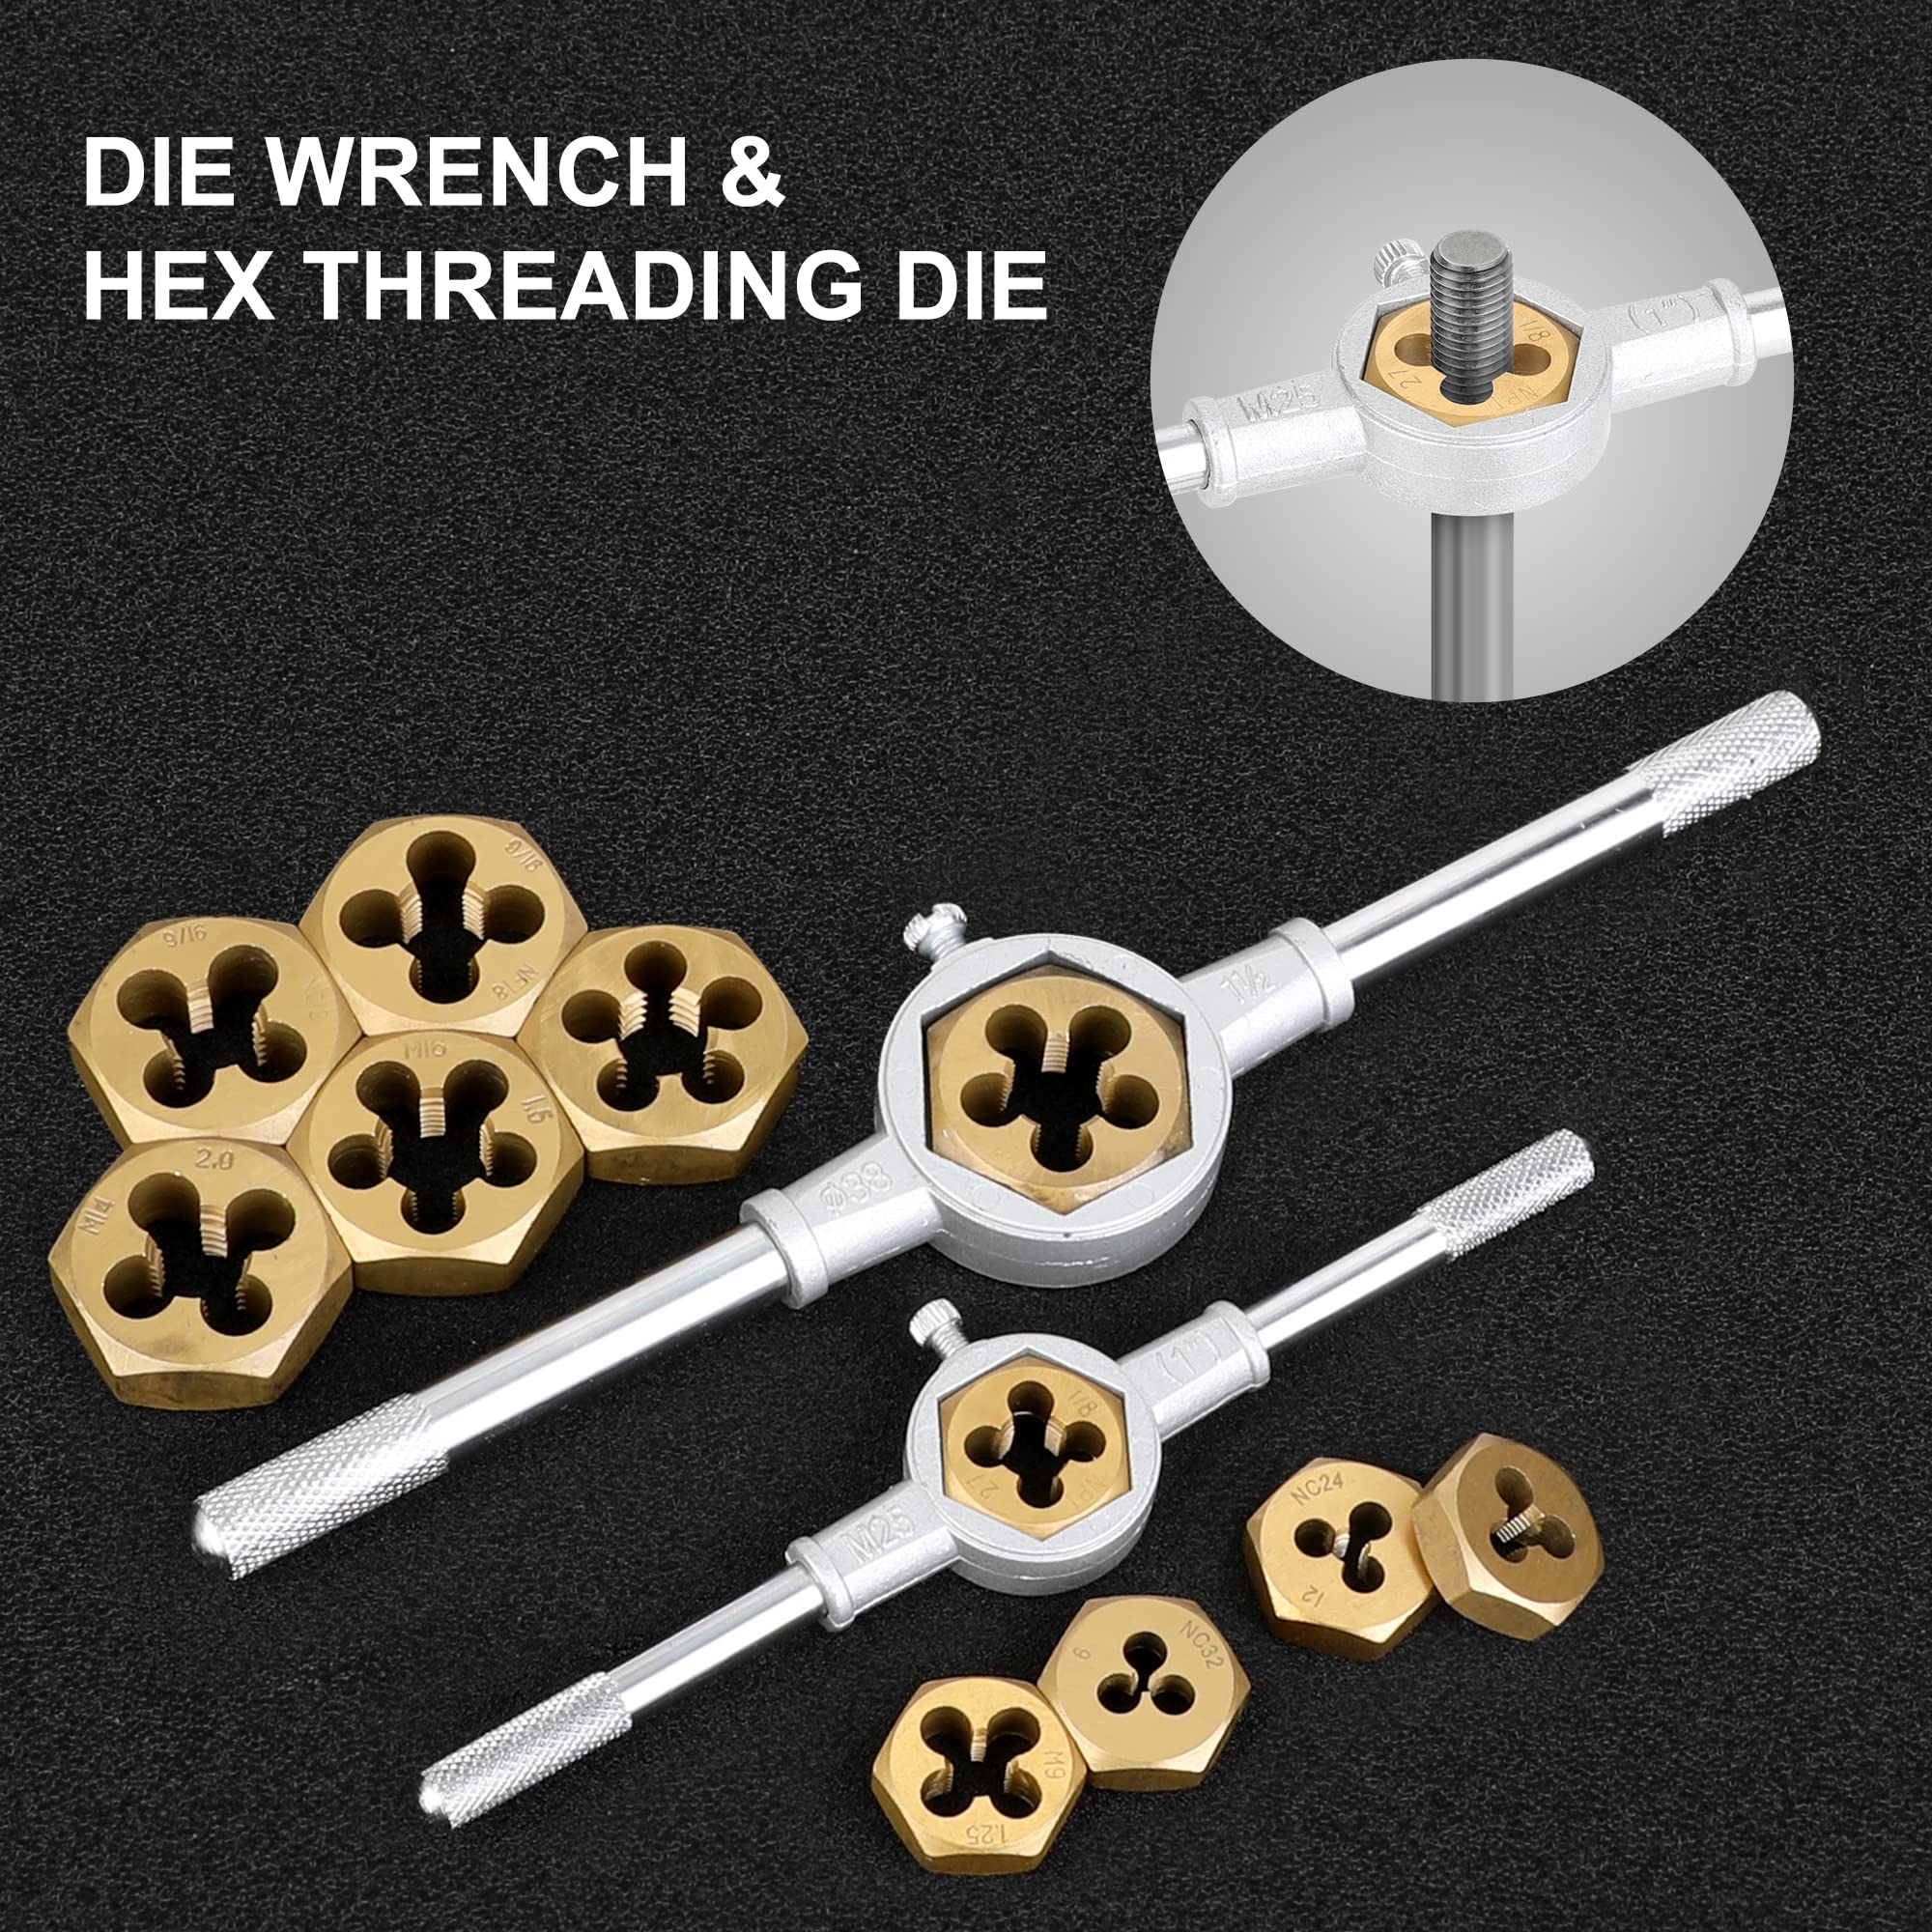 WYNNsky Die and Tap Set in SAE and Metric, Hex Threading Dies for External Threads, Thread Tap for Internal Threads, Thread Wrench, Thread Pitch Gauge, 86 Pieces Gauge Kit for DIY Tapered